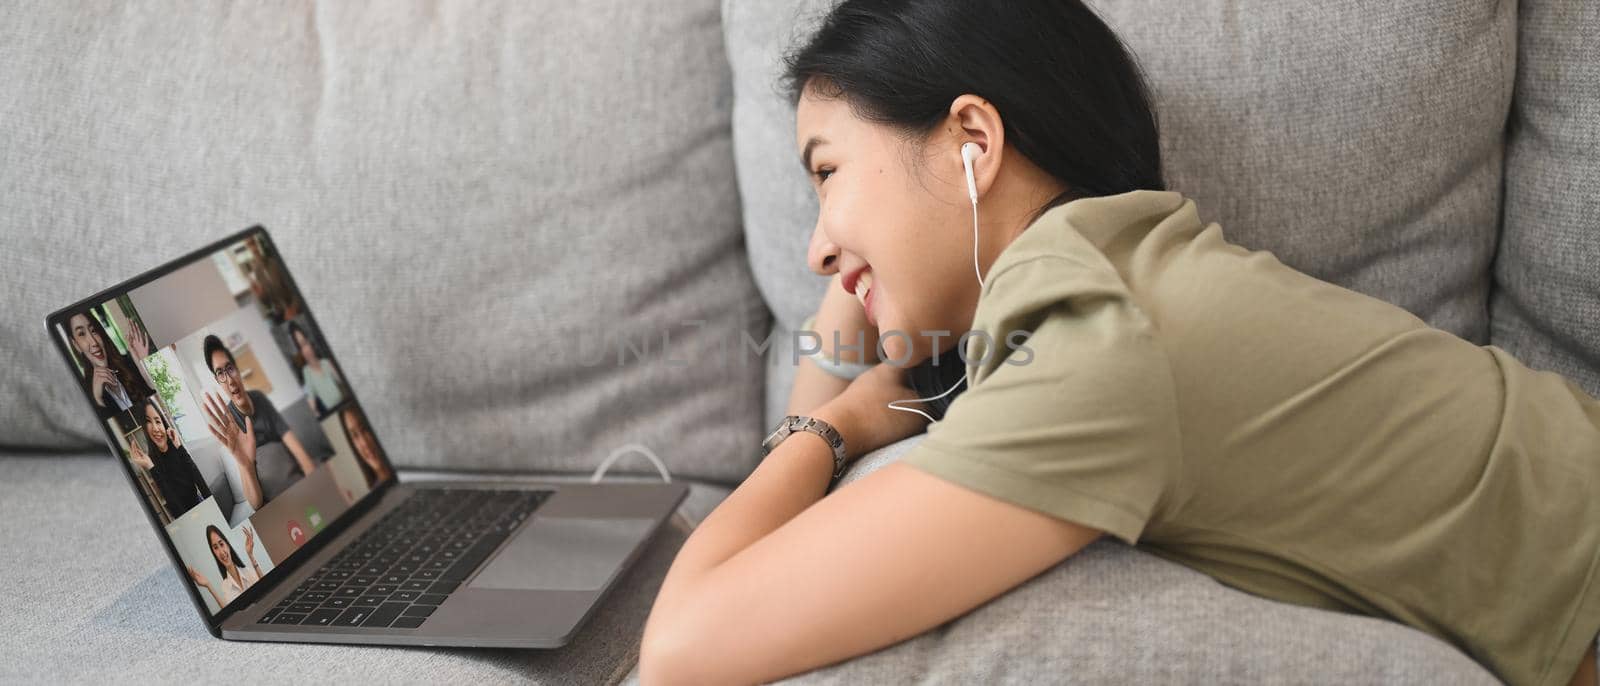 Cheerful young woman communicating by video conference via laptop while lying on couch at home by prathanchorruangsak